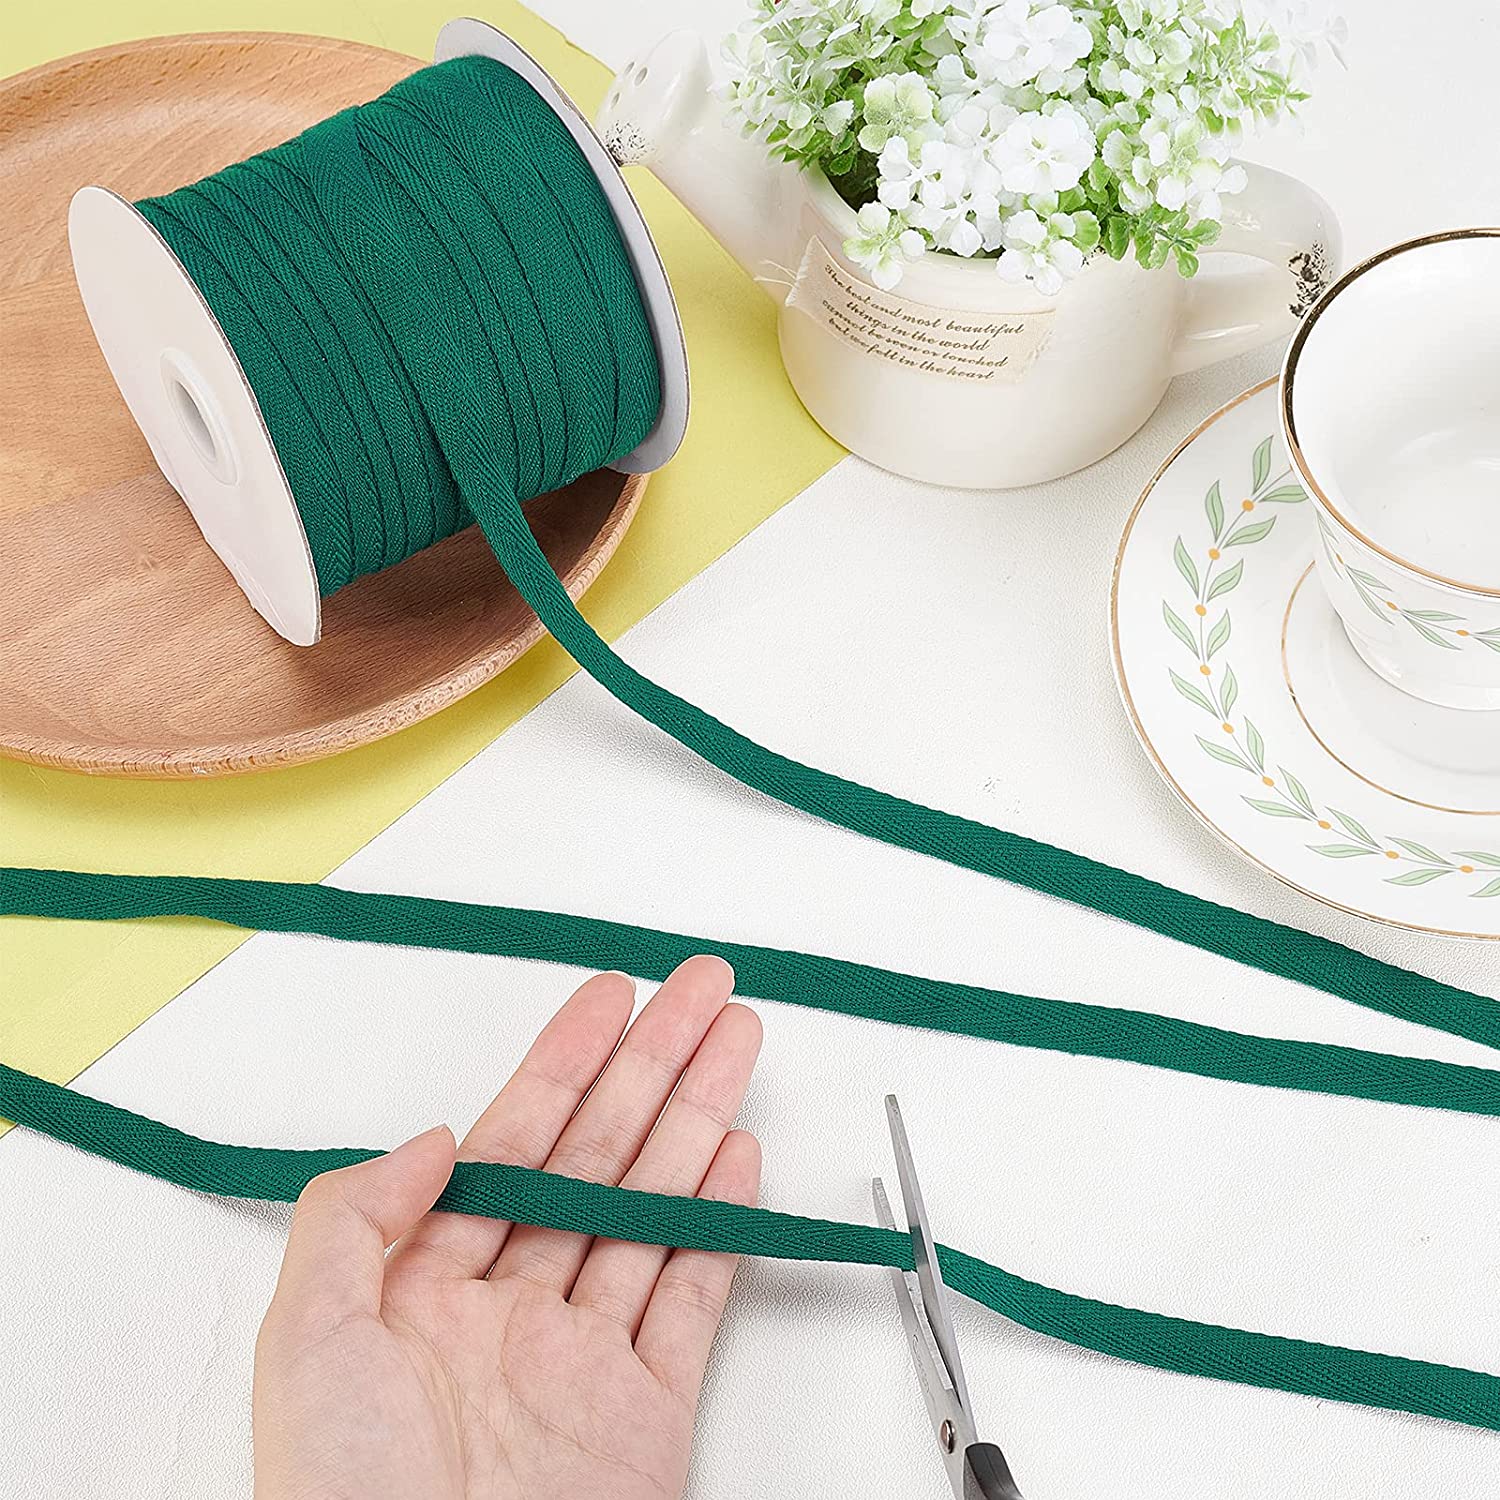 80 Yards(73.15m)/Roll Cotton Tape Ribbons, Herringbone Cotton Webbings, 11mm Wide Flat Cotton Herringbone Cords for Knit Sewing DIY Crafts, Dark Green